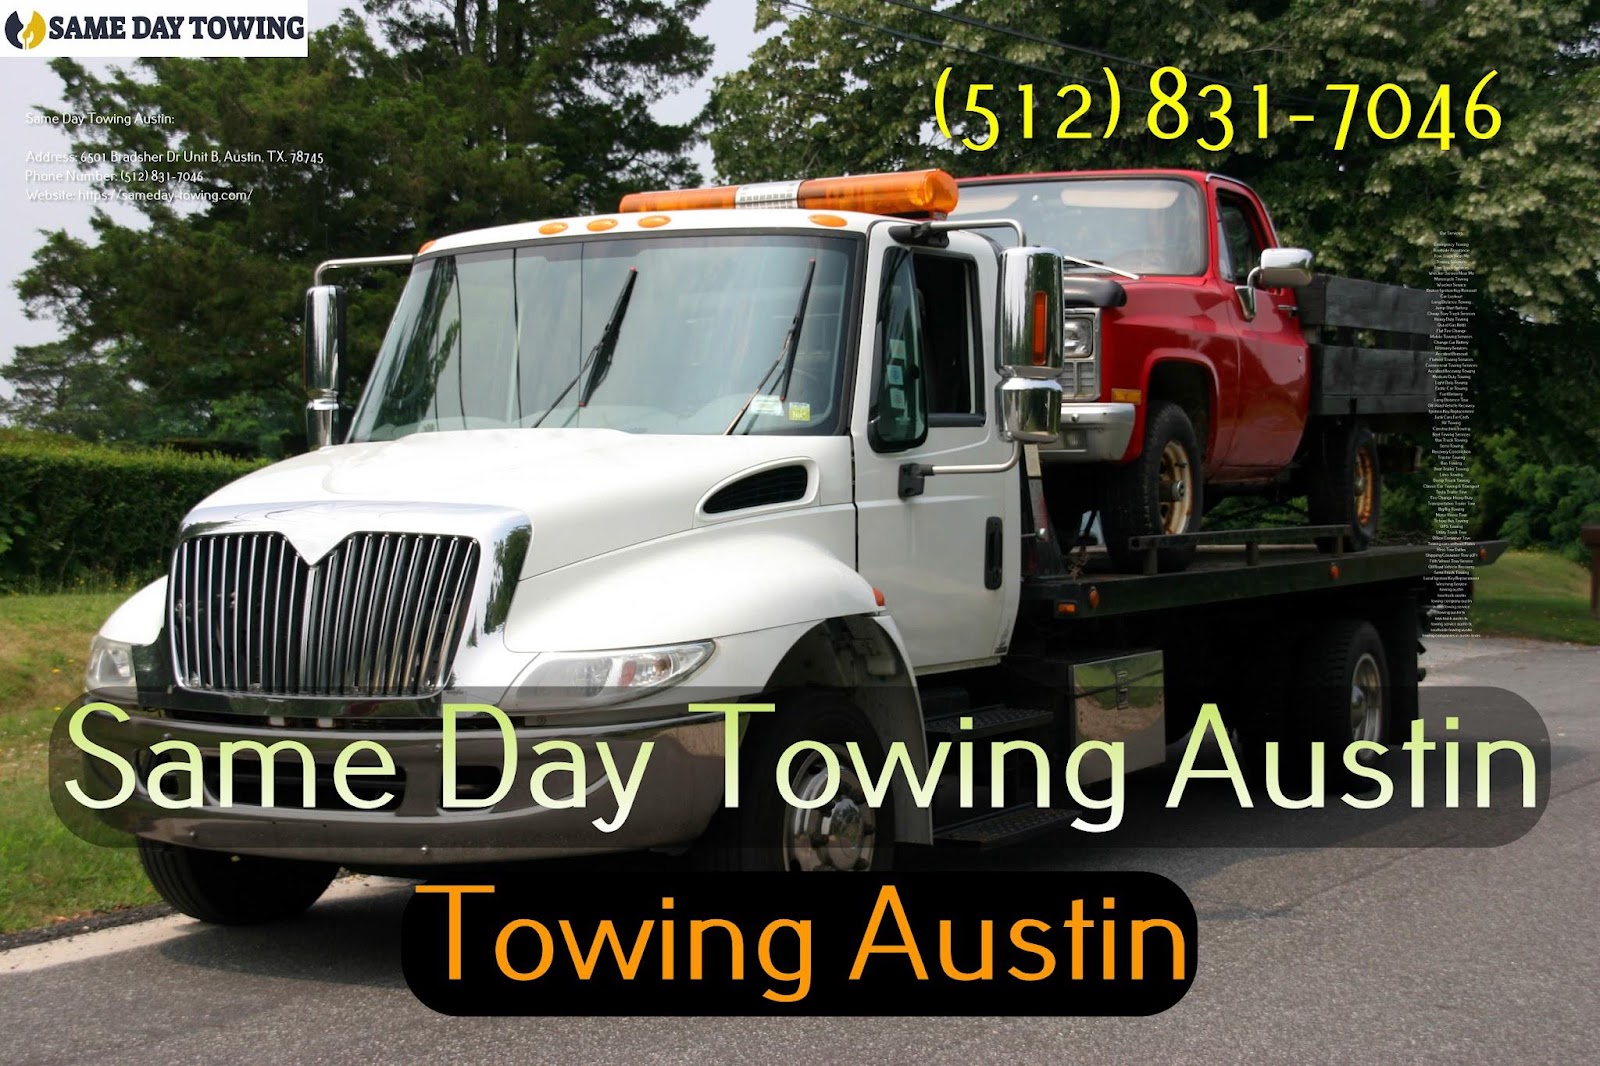 Same Day Towing Austin is a reputed towing company in Austin, TX. The company has been offering professional towing services in Austin and surrounding areas.